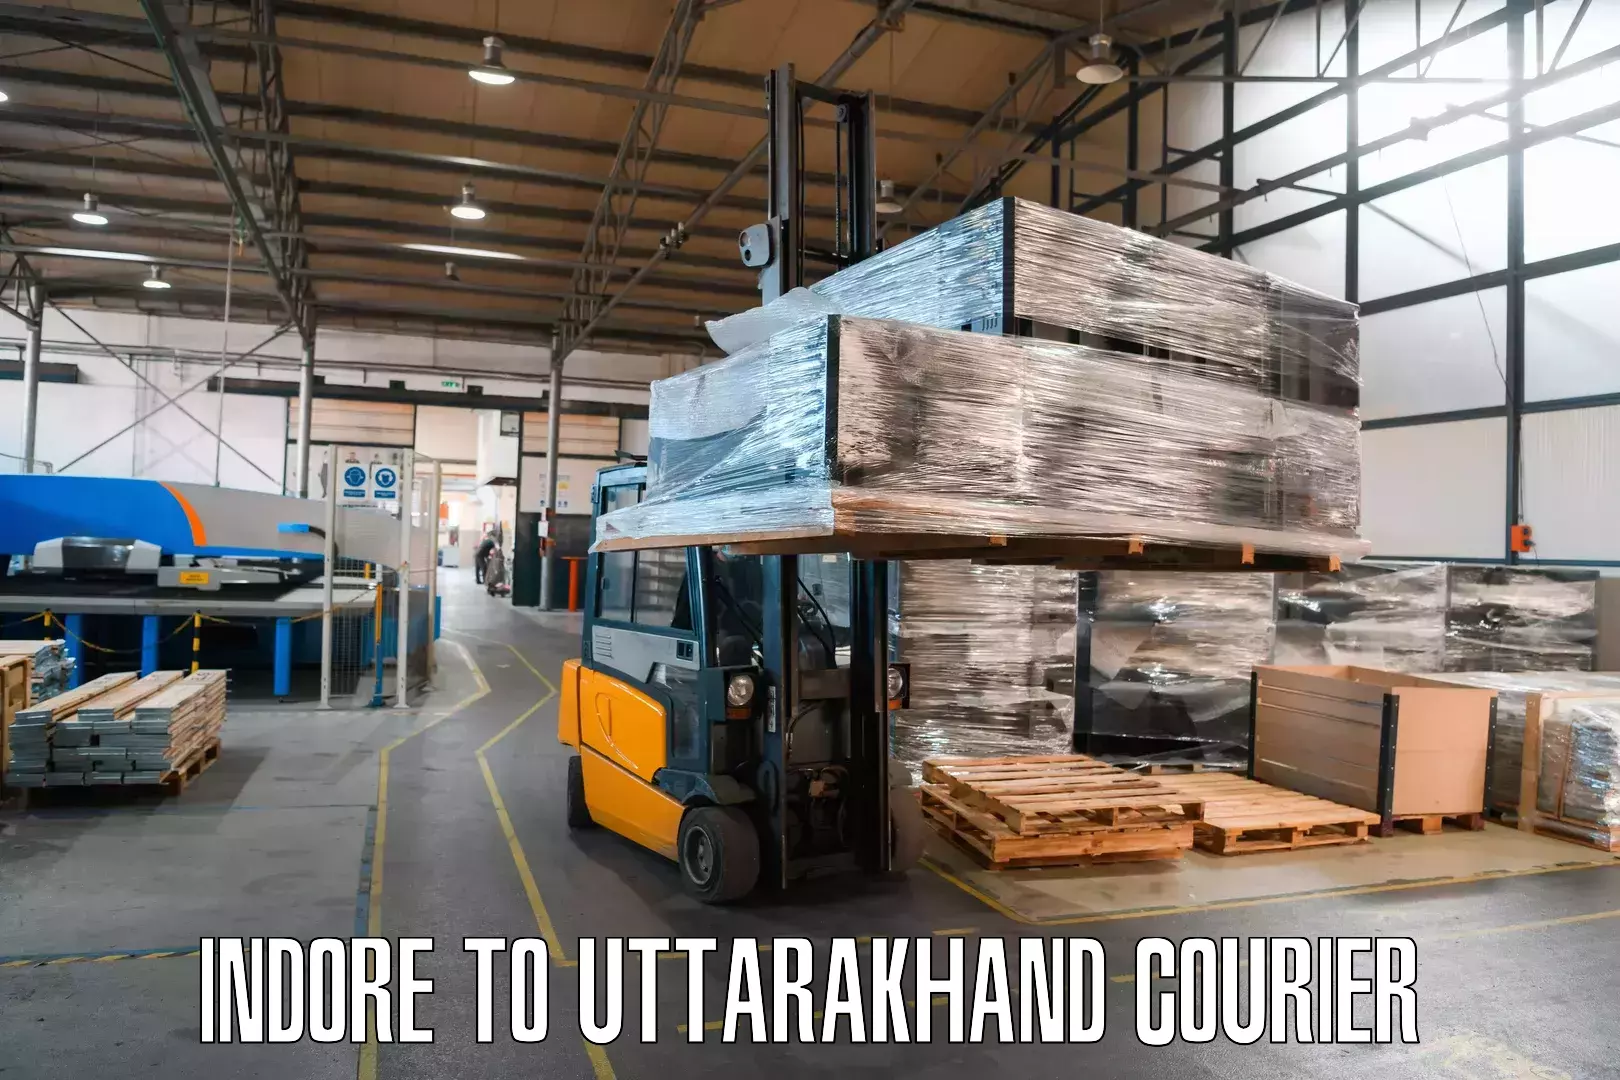 Enhanced delivery experience Indore to Uttarakhand